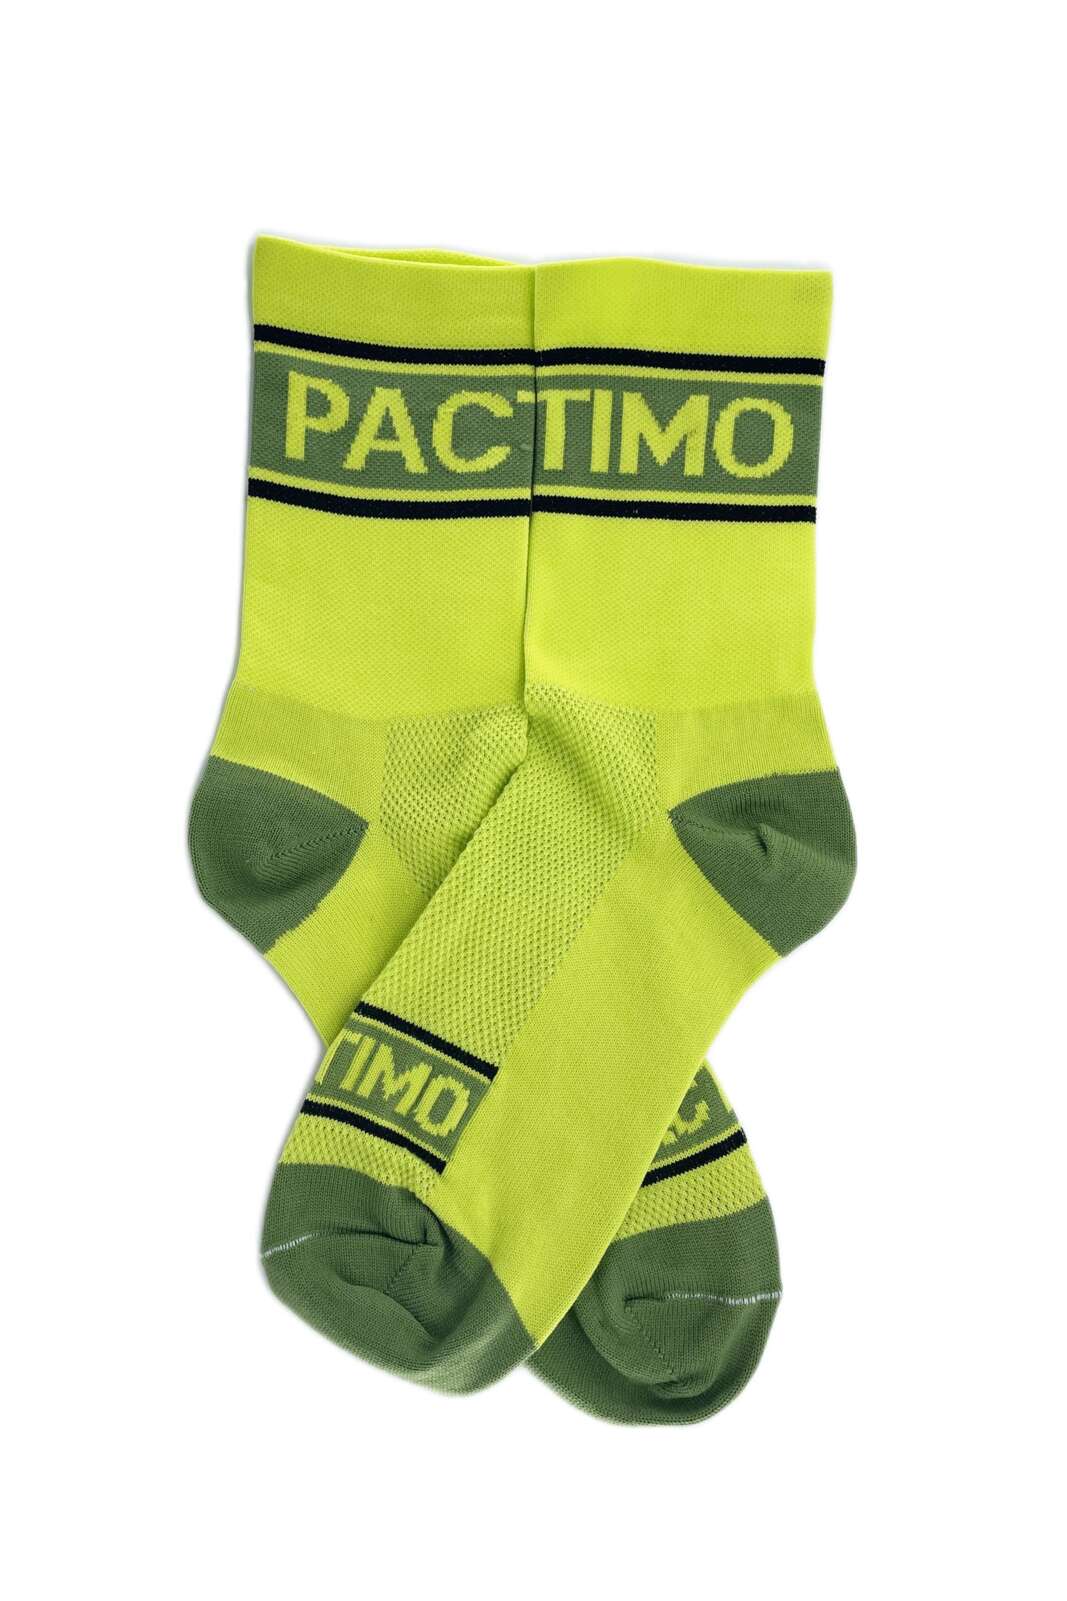 Yellow/Green Cycling Socks - Ascent Side by Side